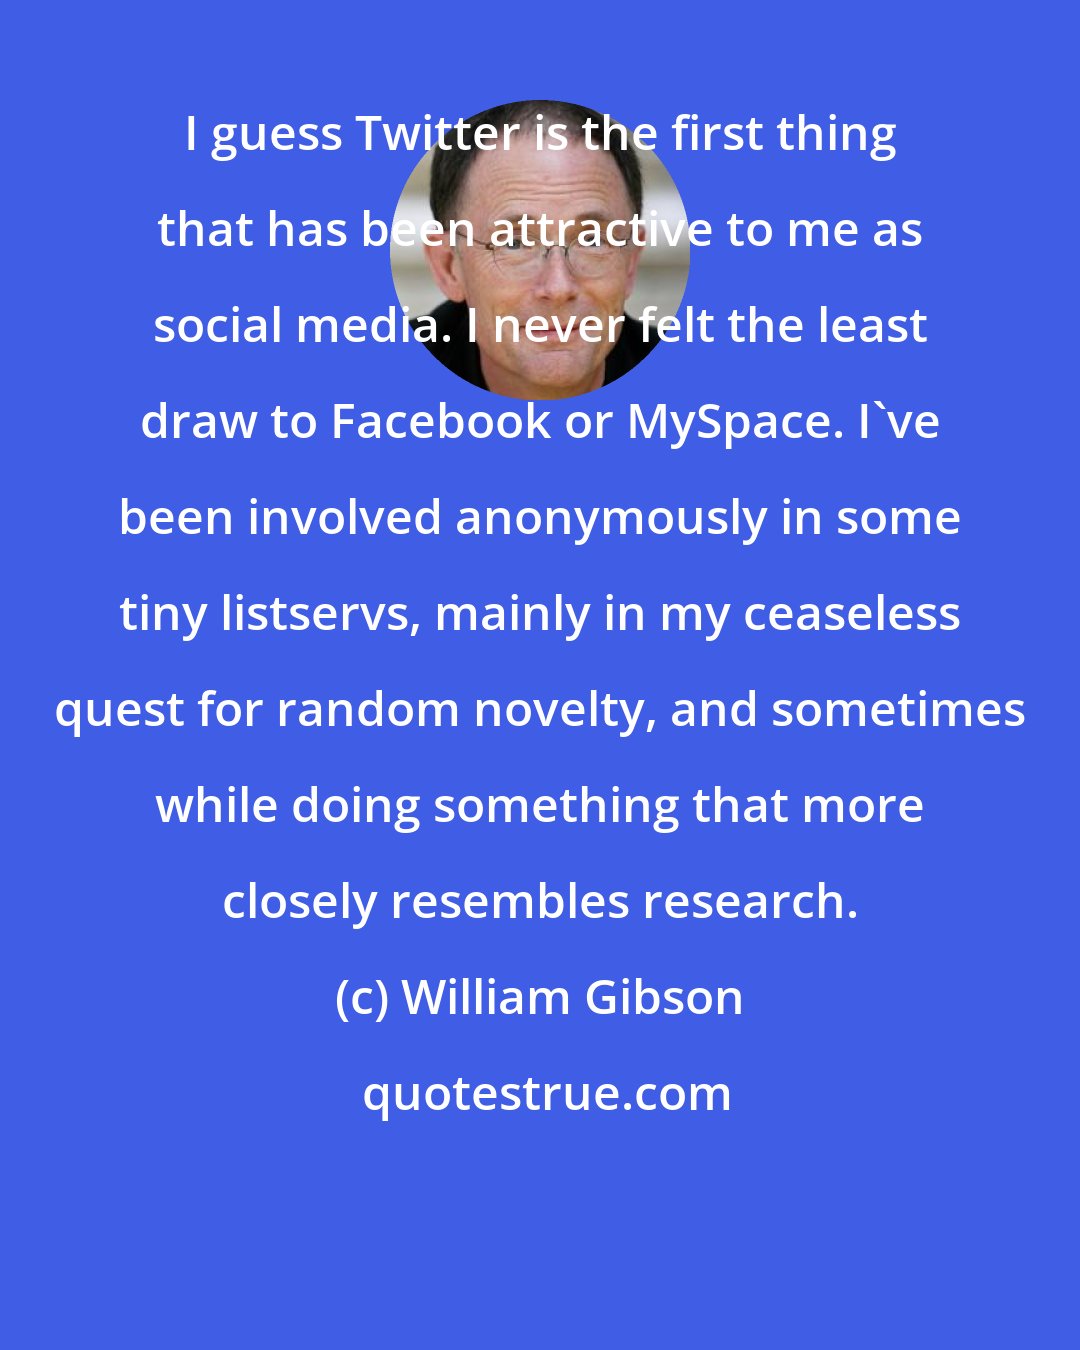 William Gibson: I guess Twitter is the first thing that has been attractive to me as social media. I never felt the least draw to Facebook or MySpace. I've been involved anonymously in some tiny listservs, mainly in my ceaseless quest for random novelty, and sometimes while doing something that more closely resembles research.